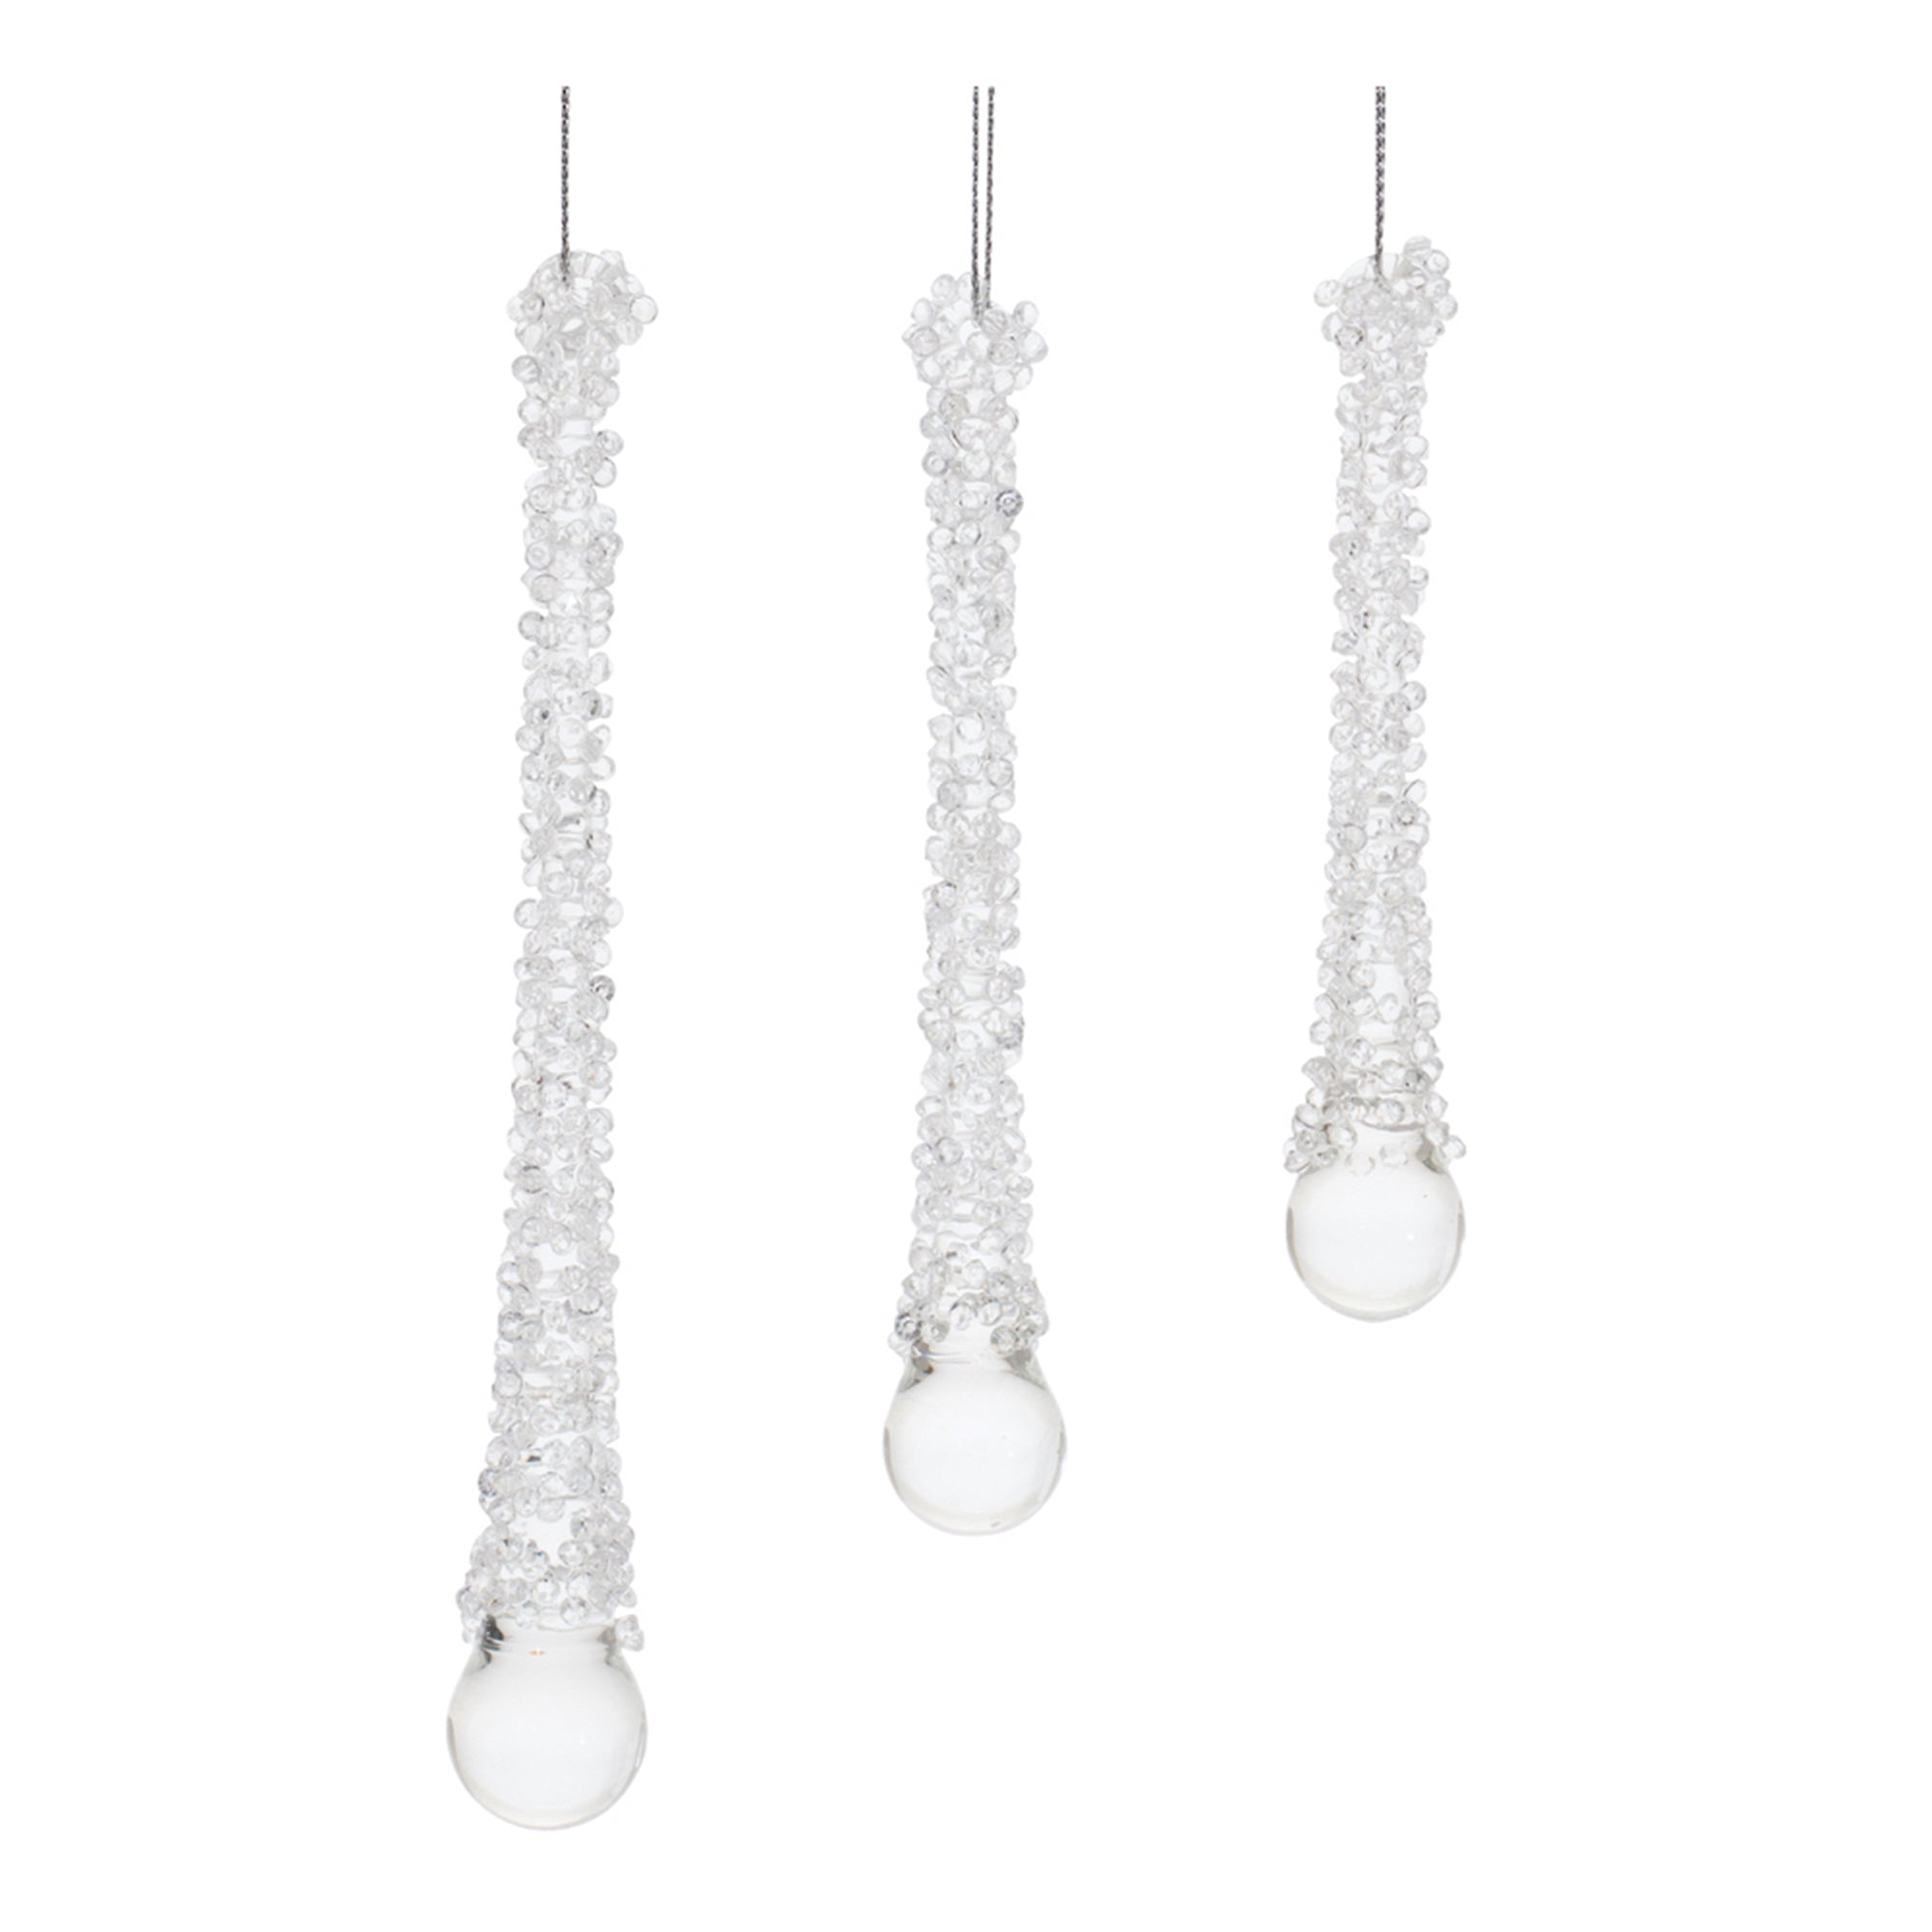 Clear Beaded Glass Icicle Drop Ornament (Set of 12)